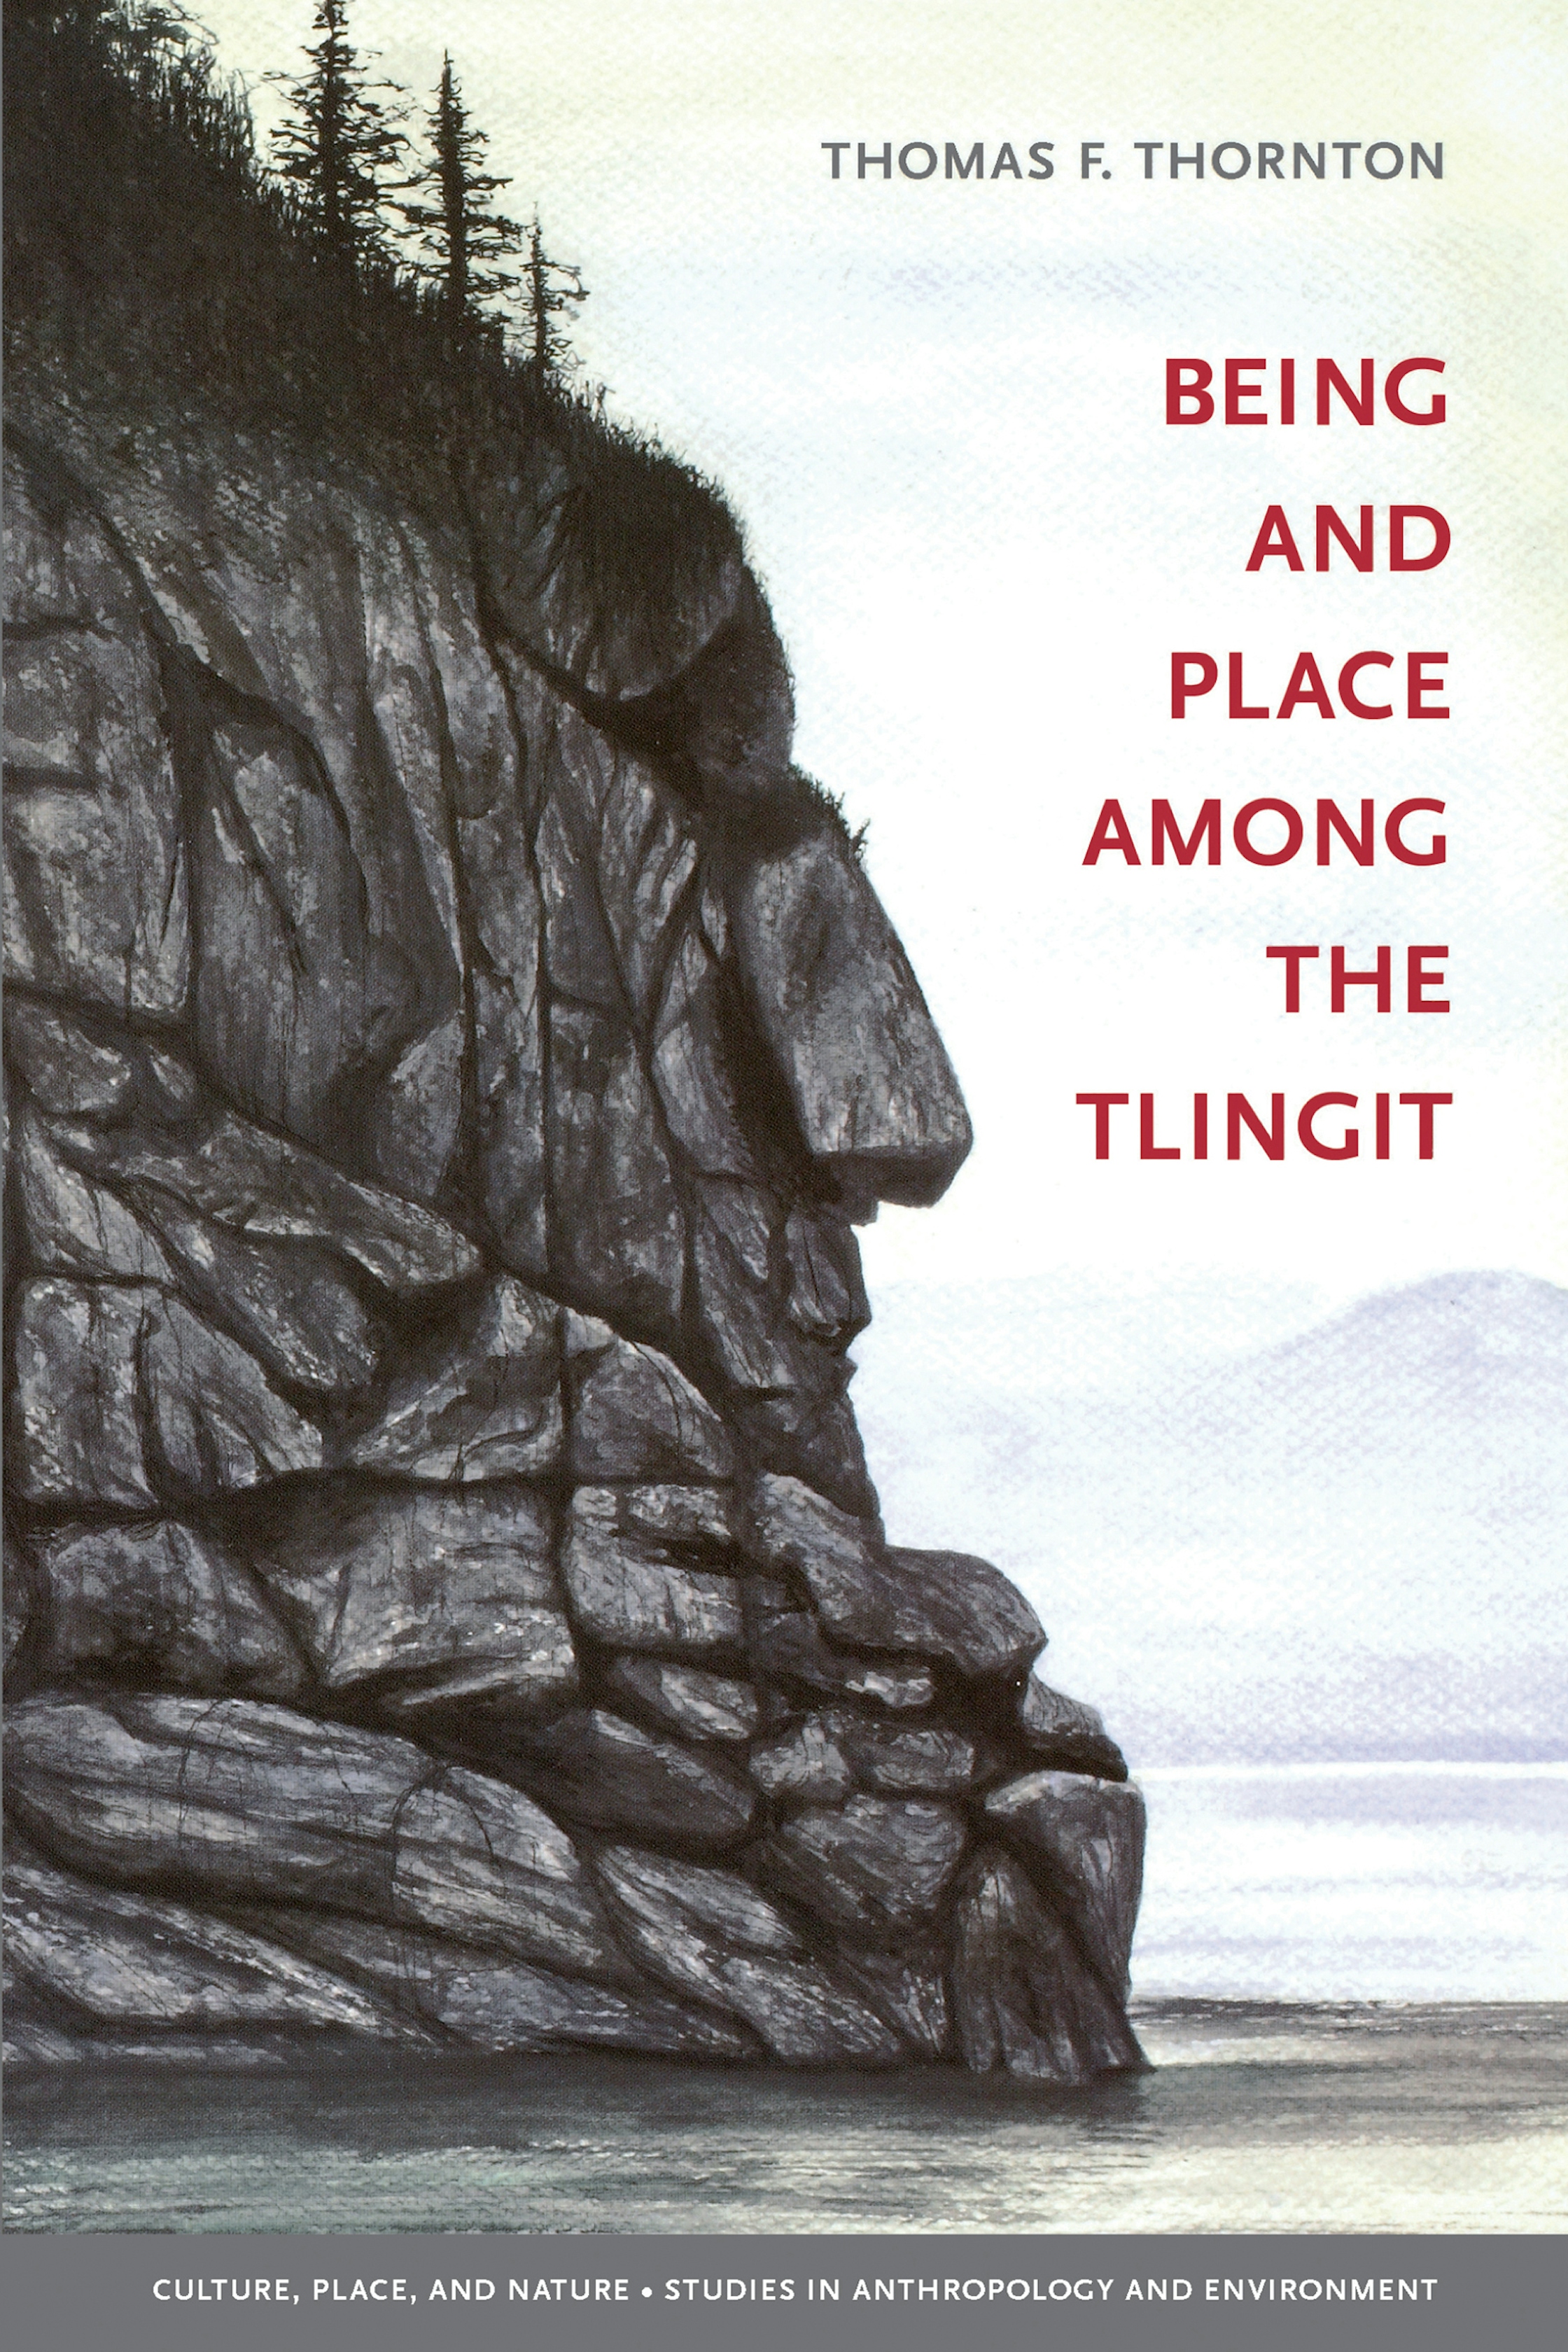 Being and Place among the Tlingit